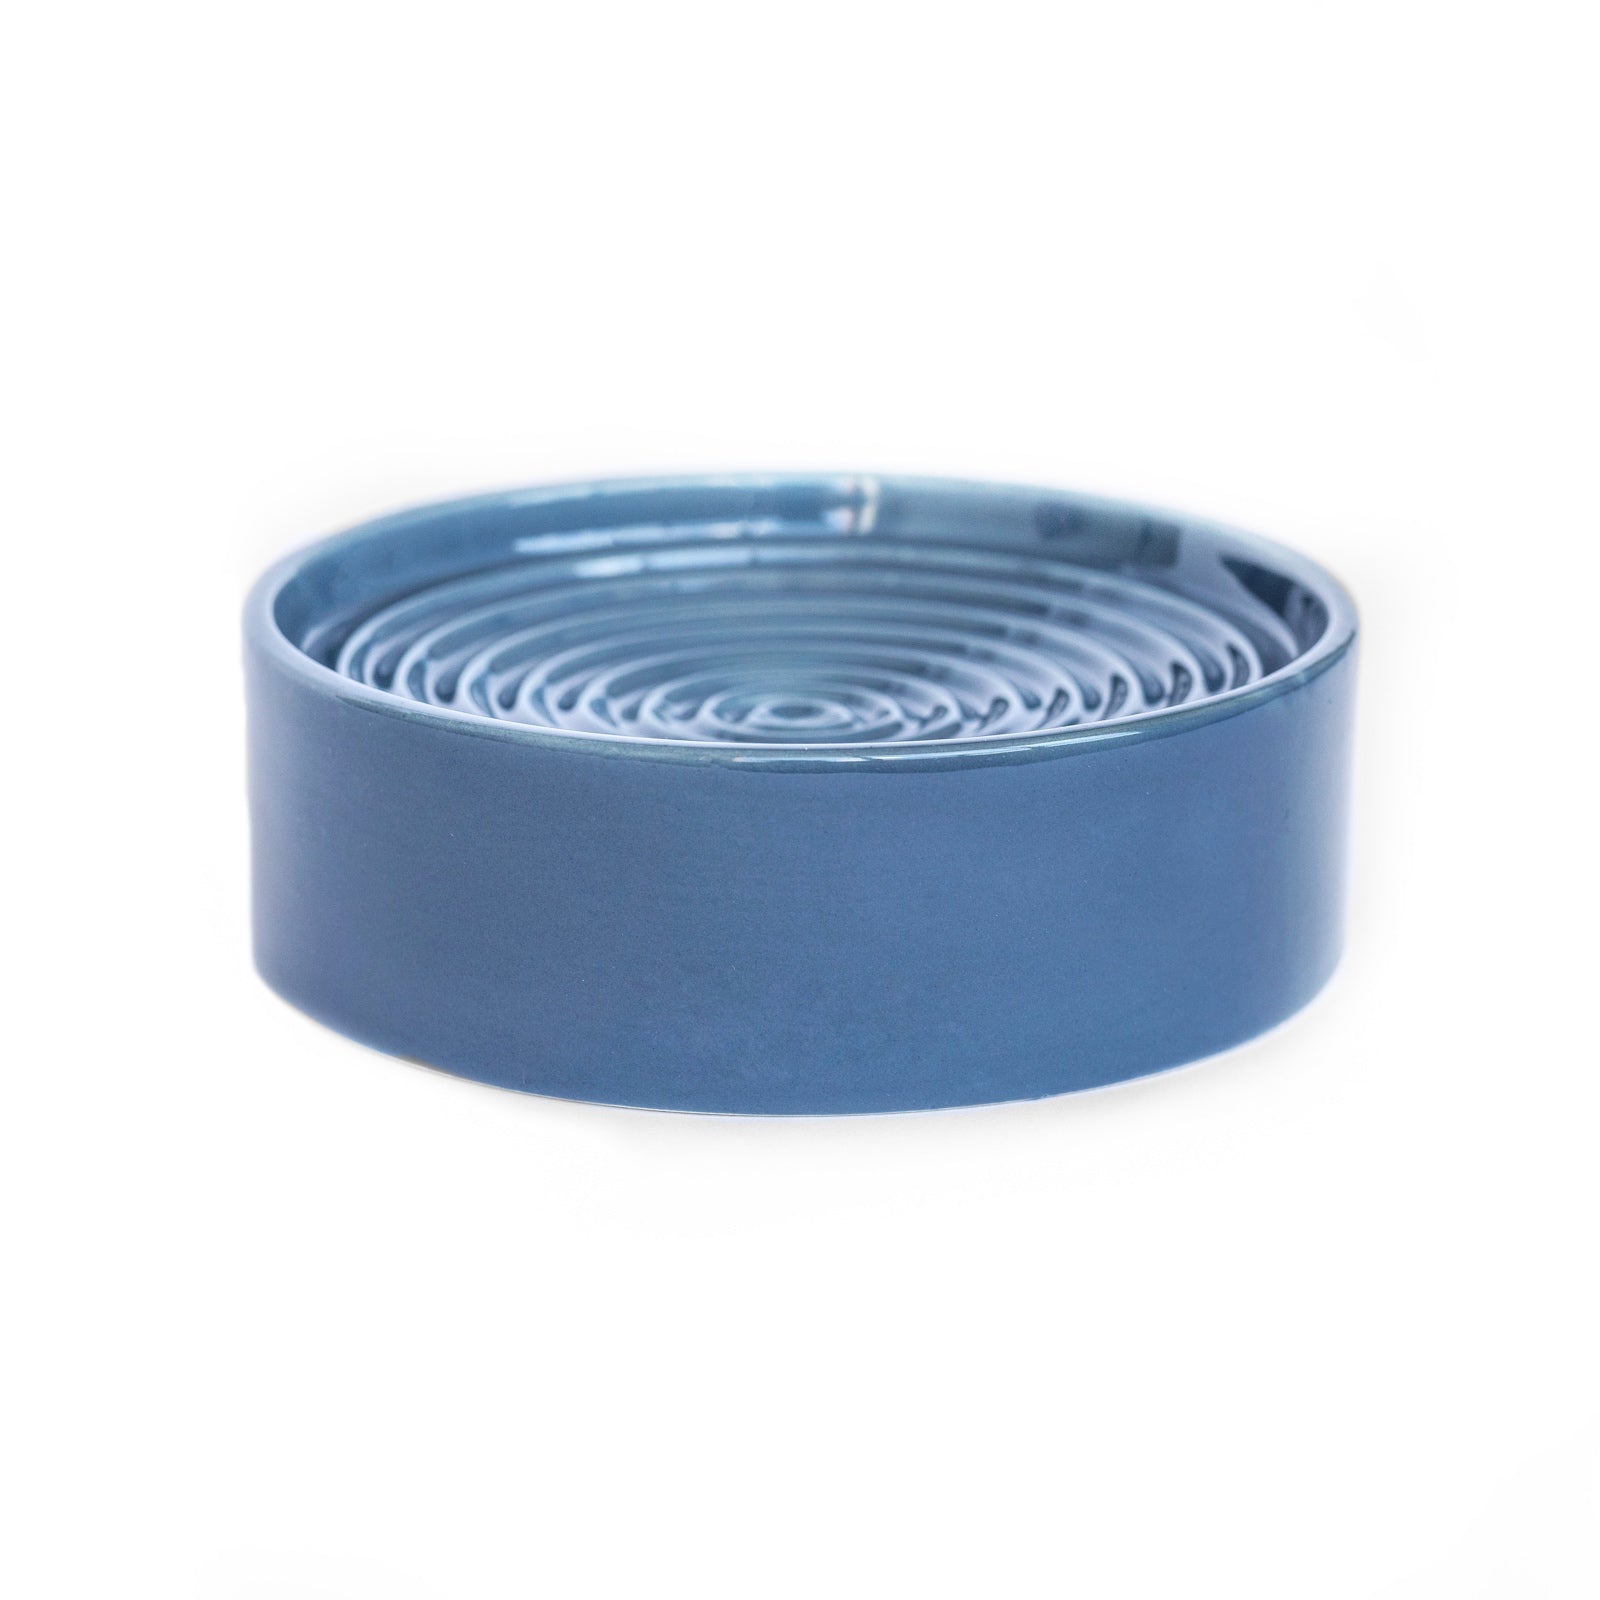 Noots Modern Ceramic Slow Feed Cat Bowl in Blue